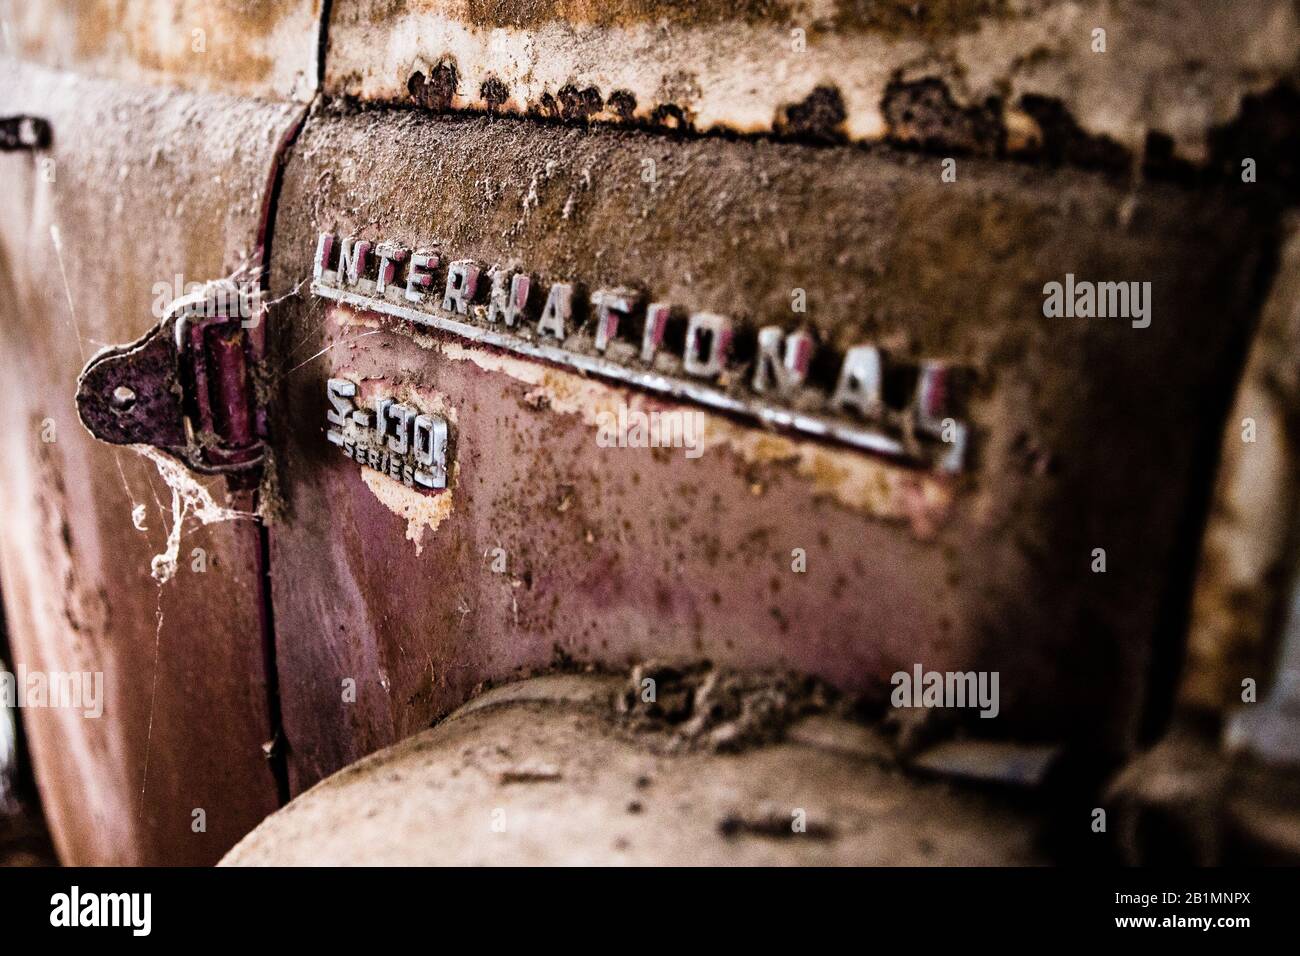 Exploring an old barn find. Stock Photo